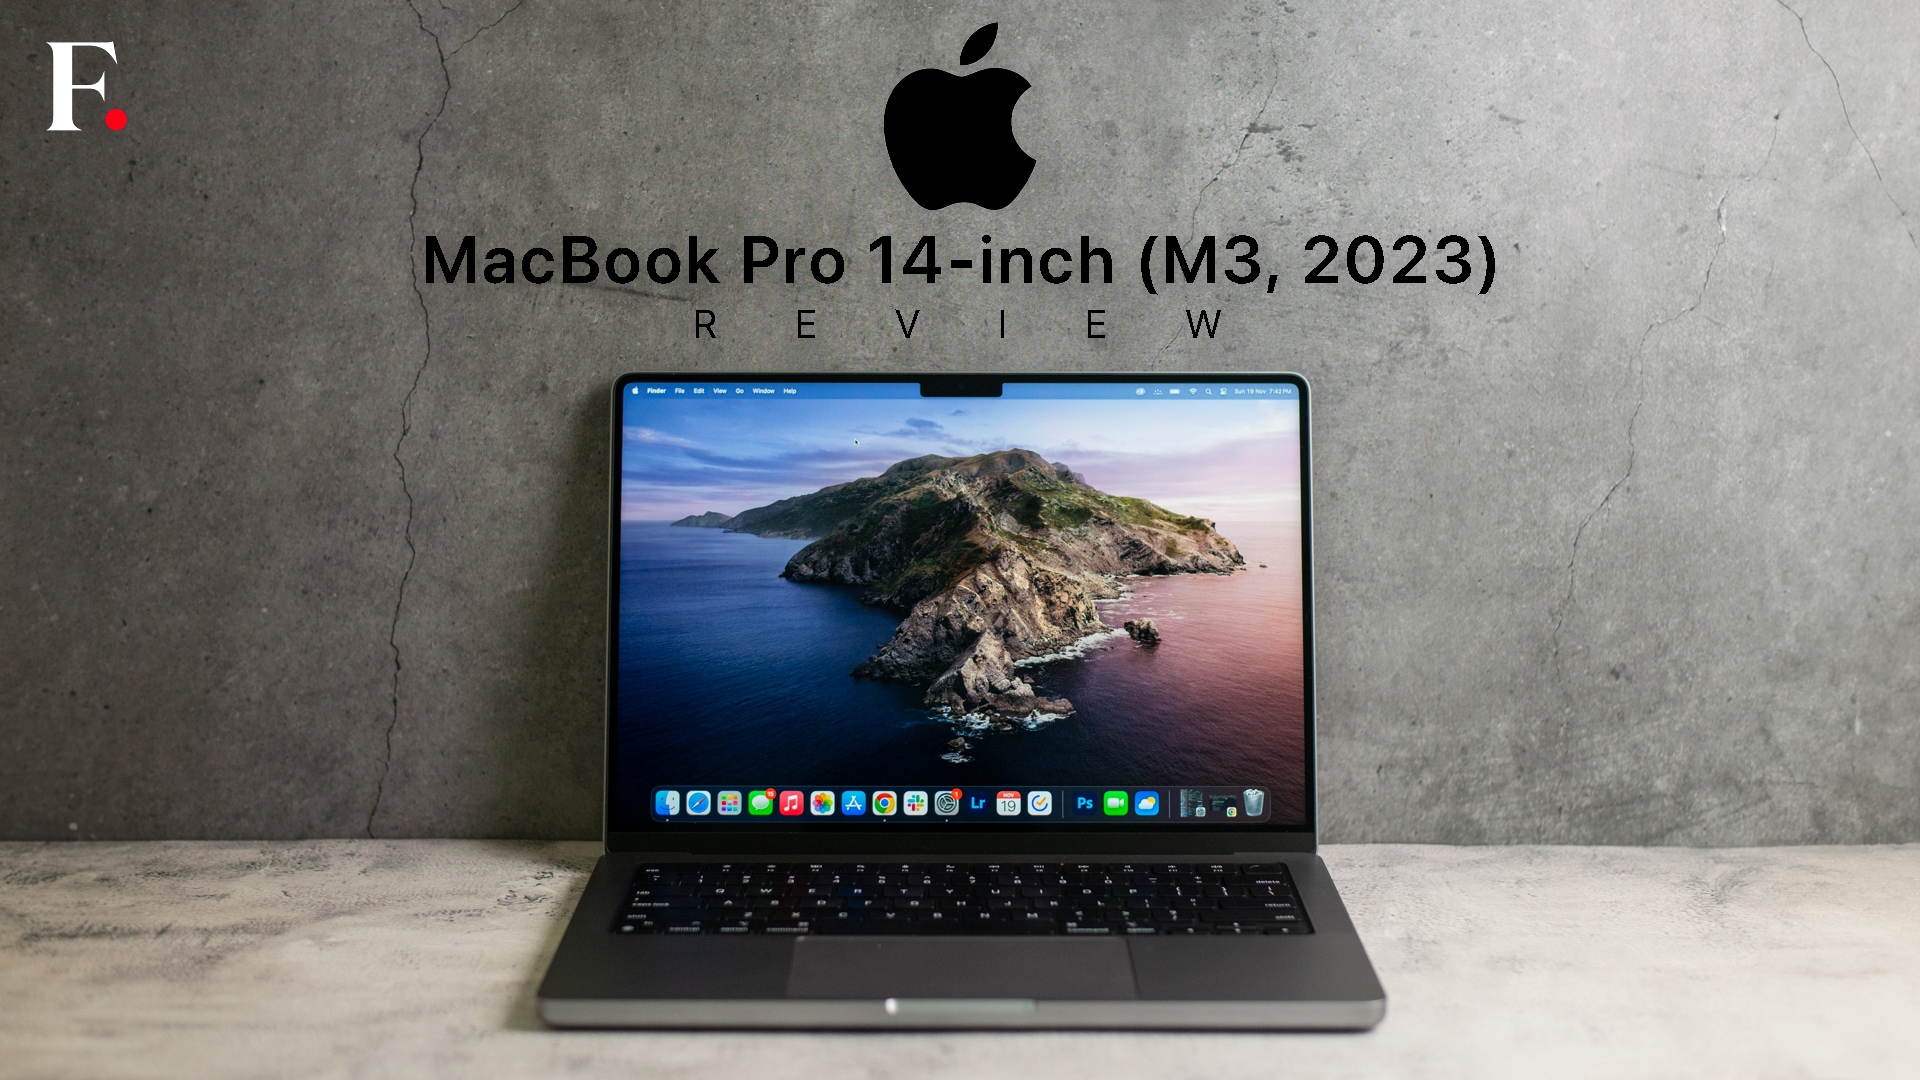 M3 MacBook Pro 14-inch review: Why you should buy this Apple laptop